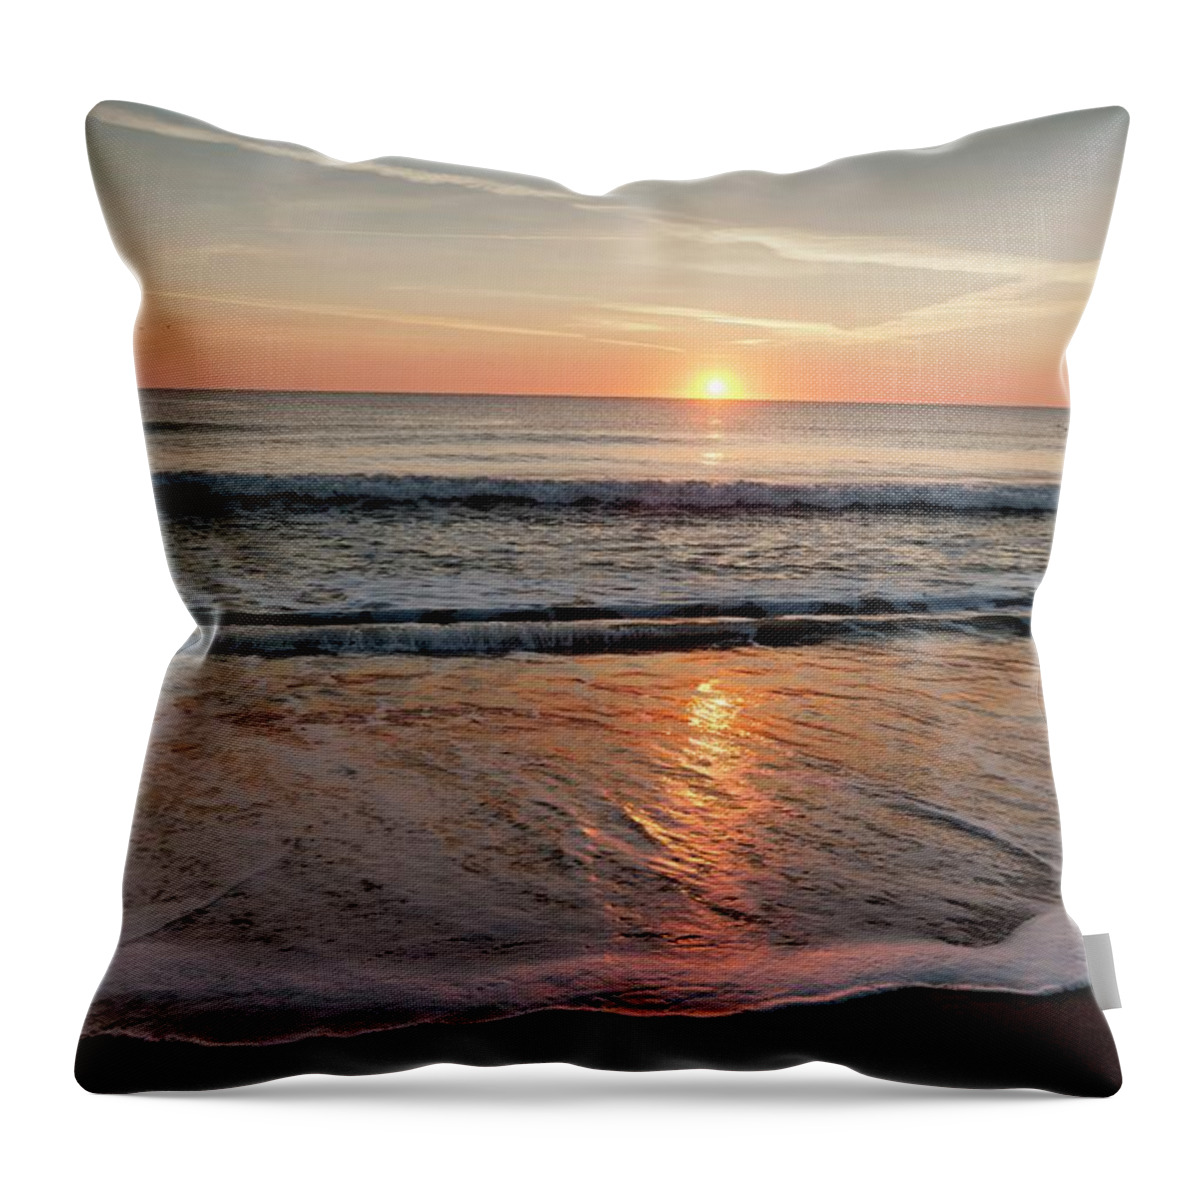 Estock Throw Pillow featuring the digital art Amelia Island, Beach At Sunset by Lumiere